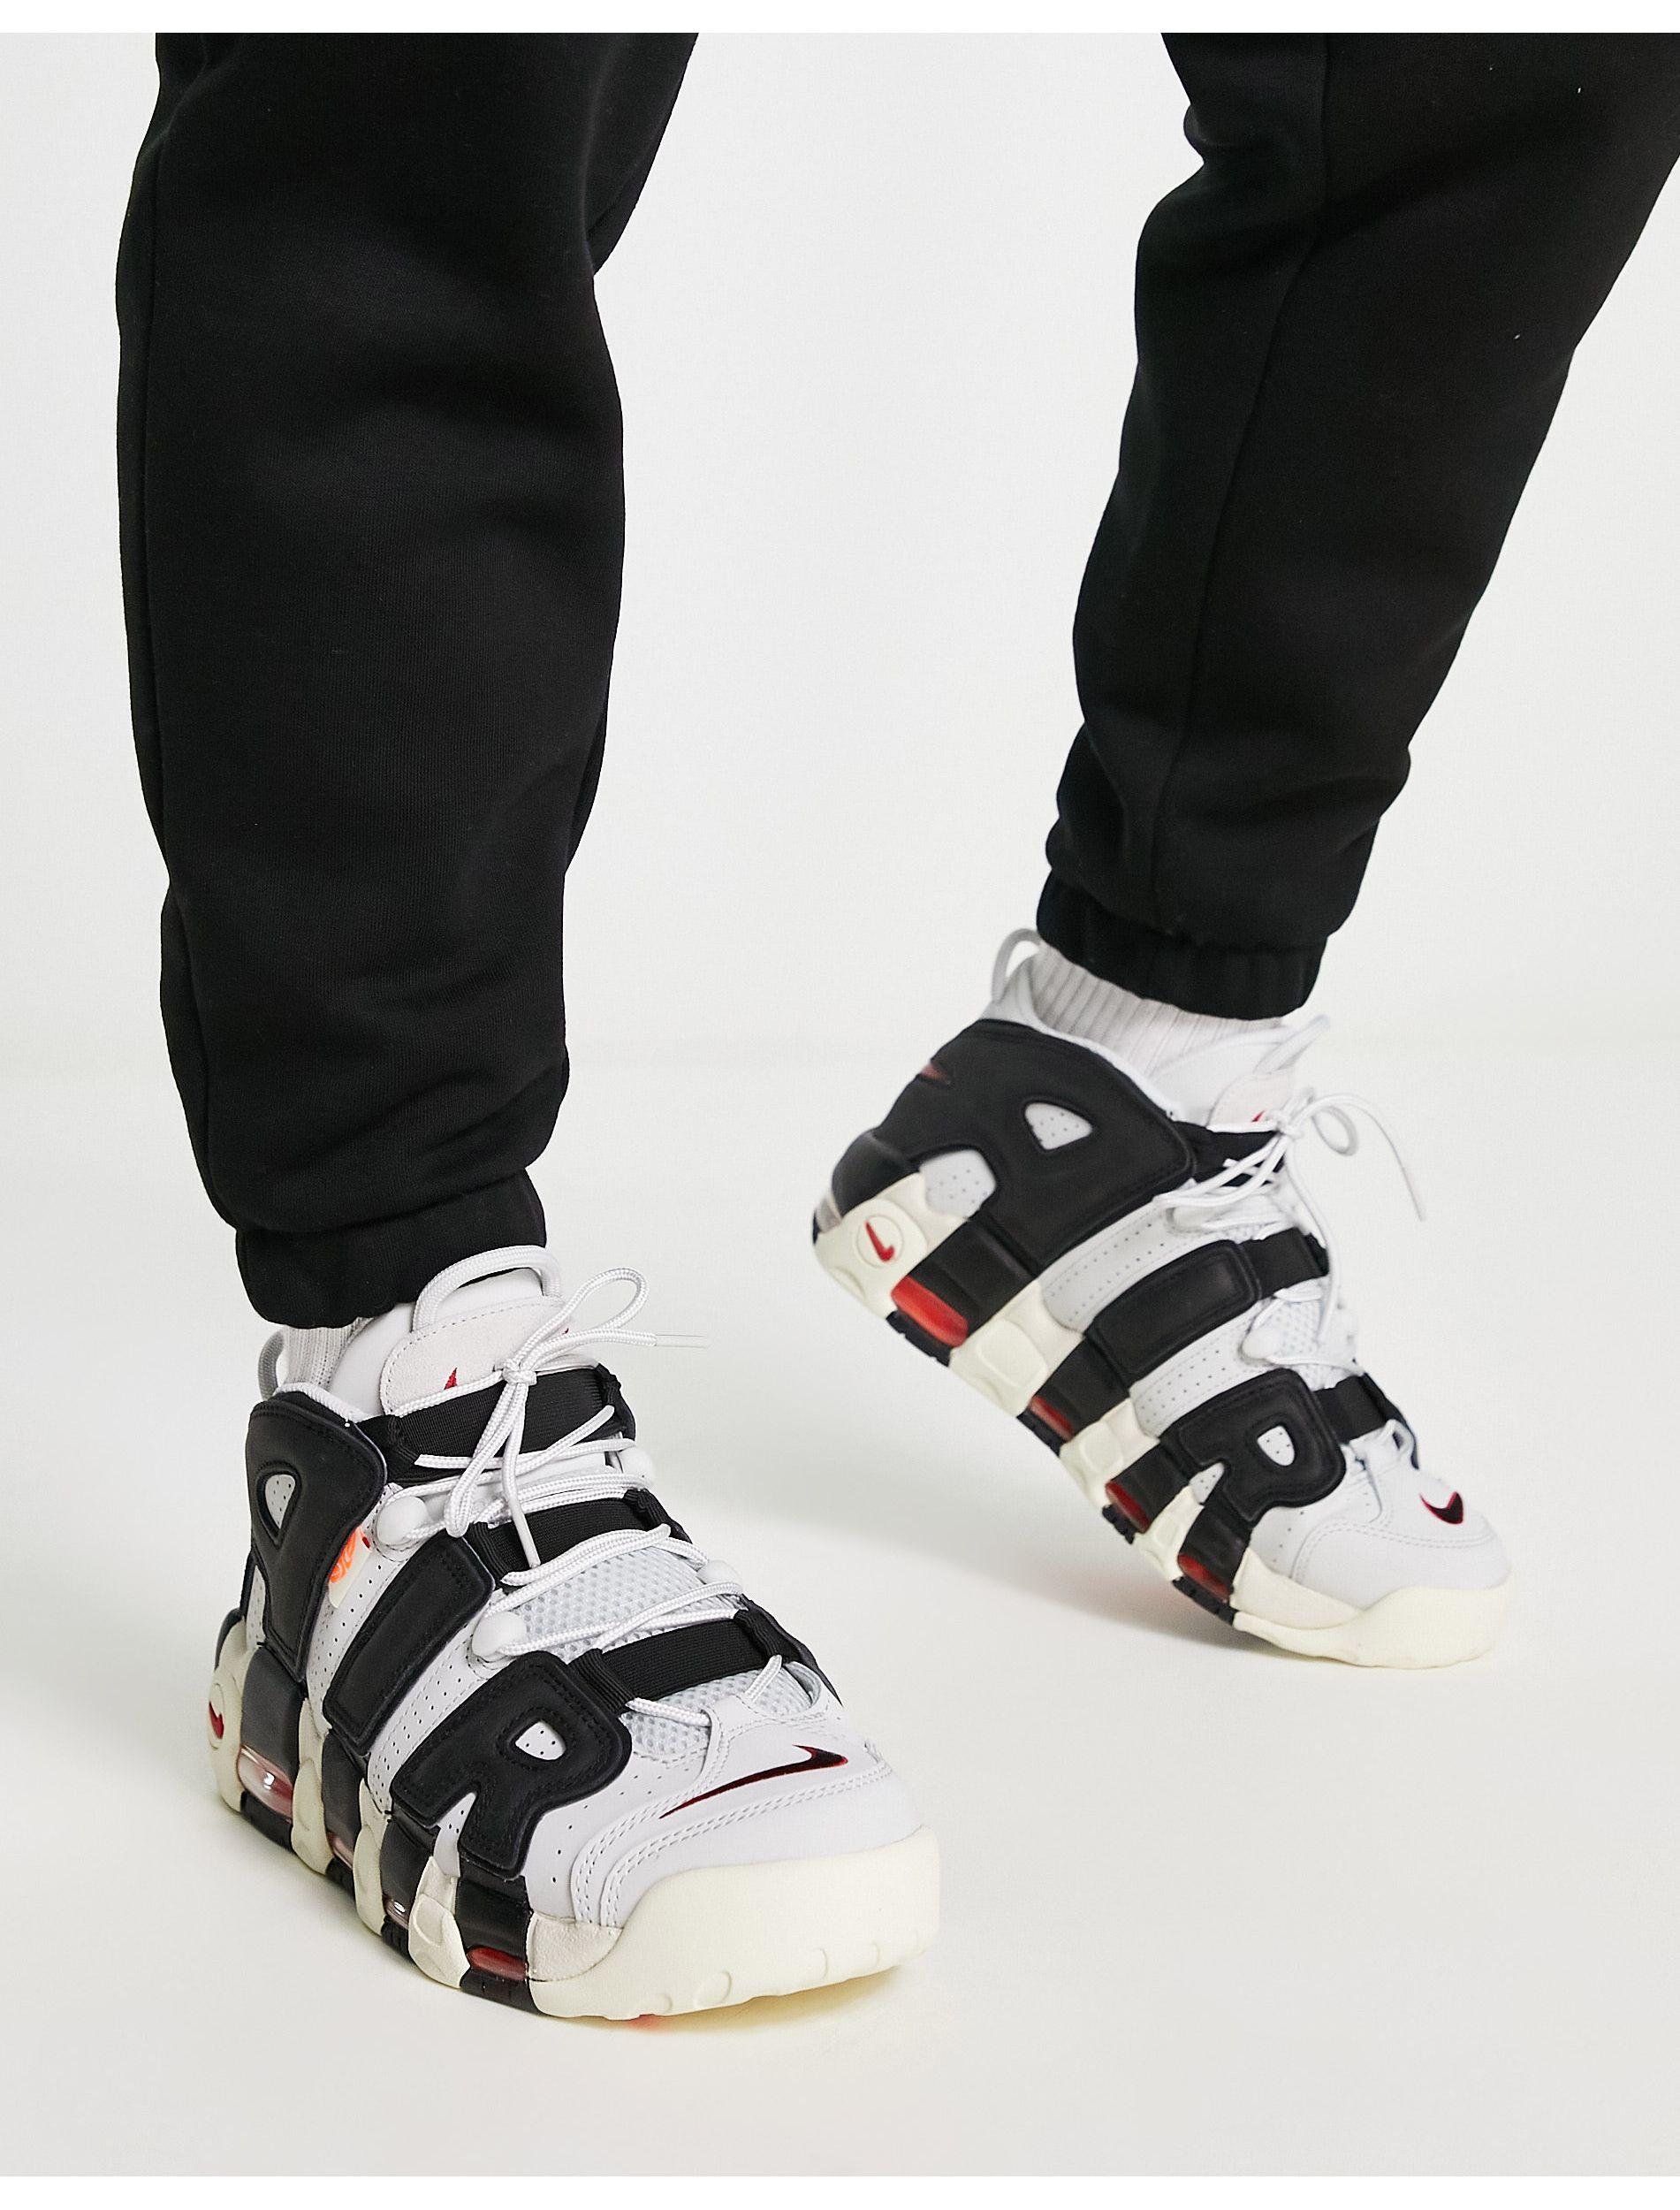  Nike Men's Air More Uptempo '96 Sneakers | Fashion Sneakers